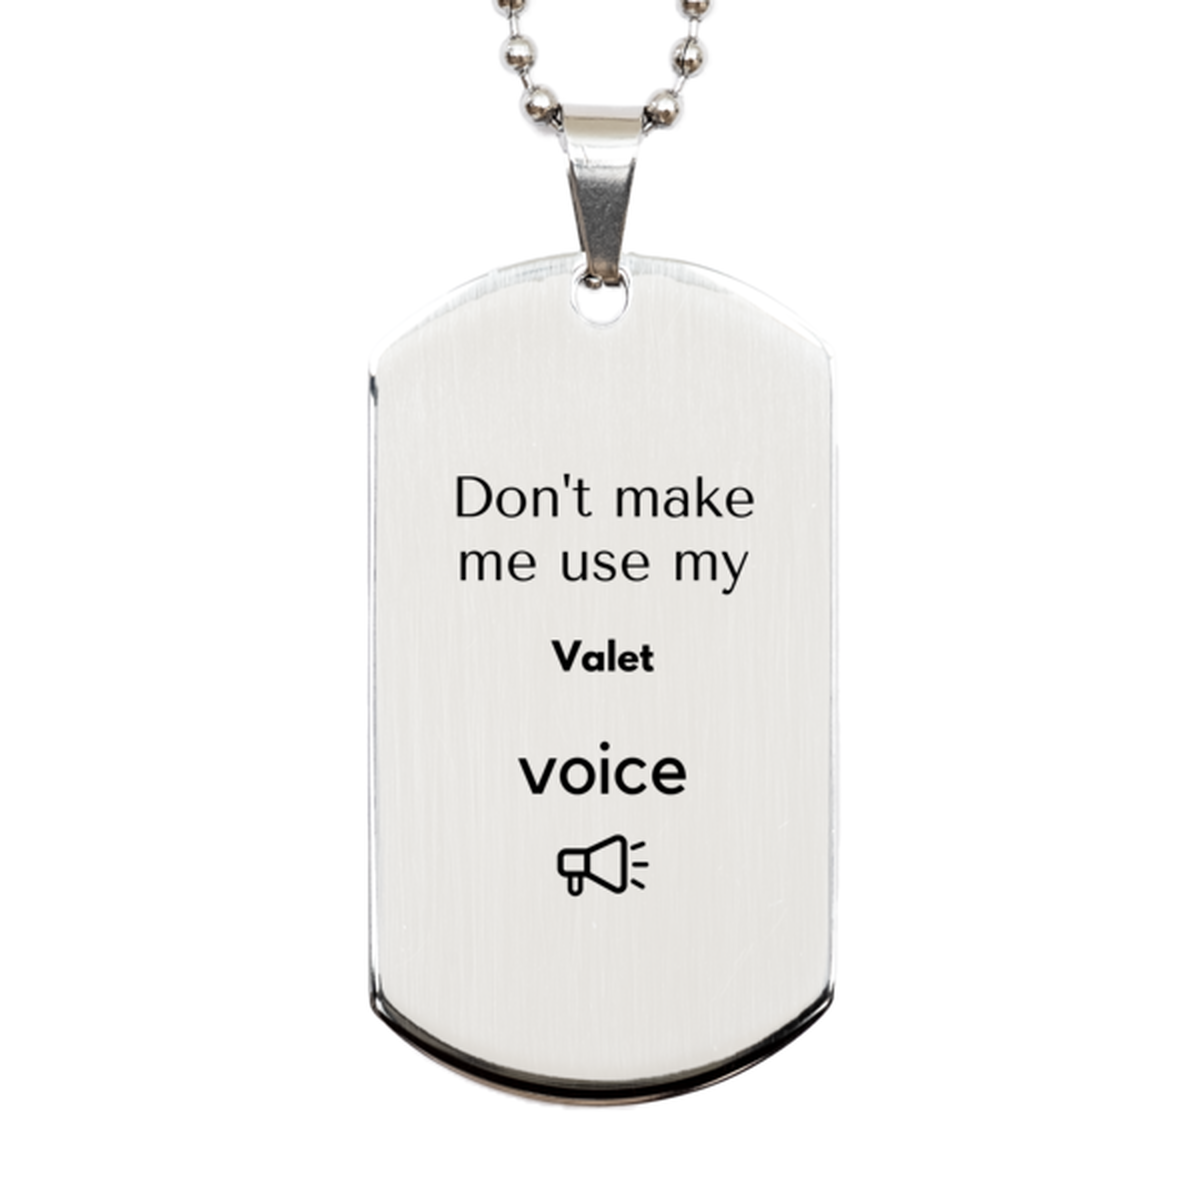 Don't make me use my Valet voice, Sarcasm Valet Gifts, Christmas Valet Silver Dog Tag Birthday Unique Gifts For Valet Coworkers, Men, Women, Colleague, Friends